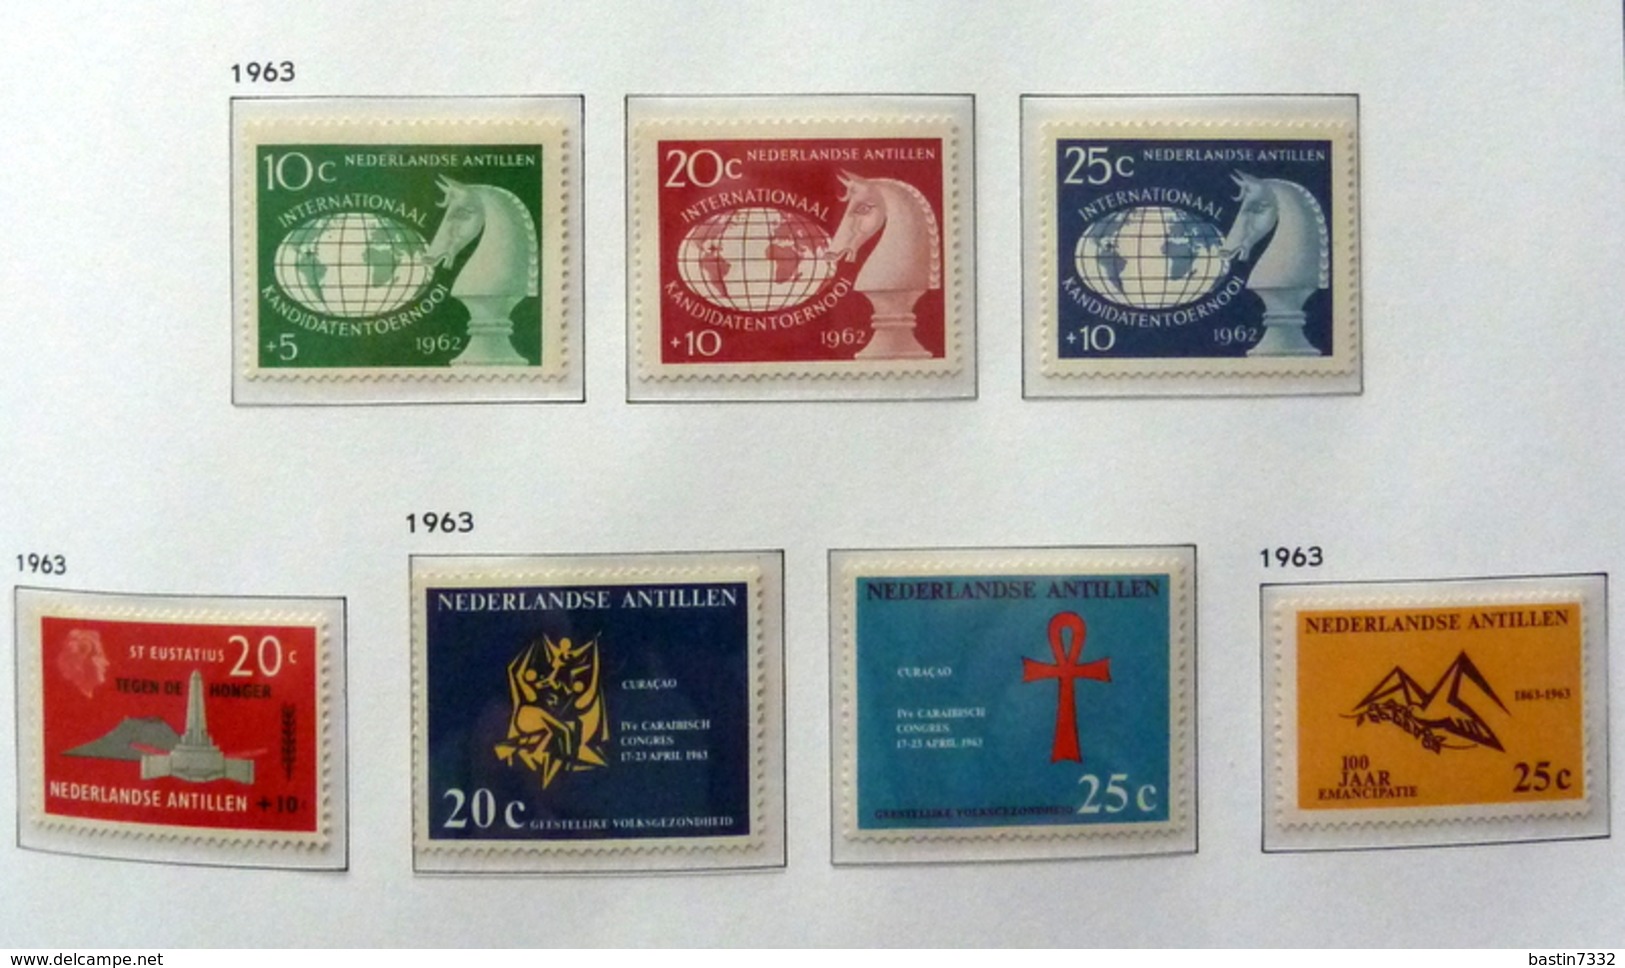 Curacao/Netherlands Antilles collection 1938-1969 in Davo Luxe with slipcase MNH/Postfris/Neuf sans charniere